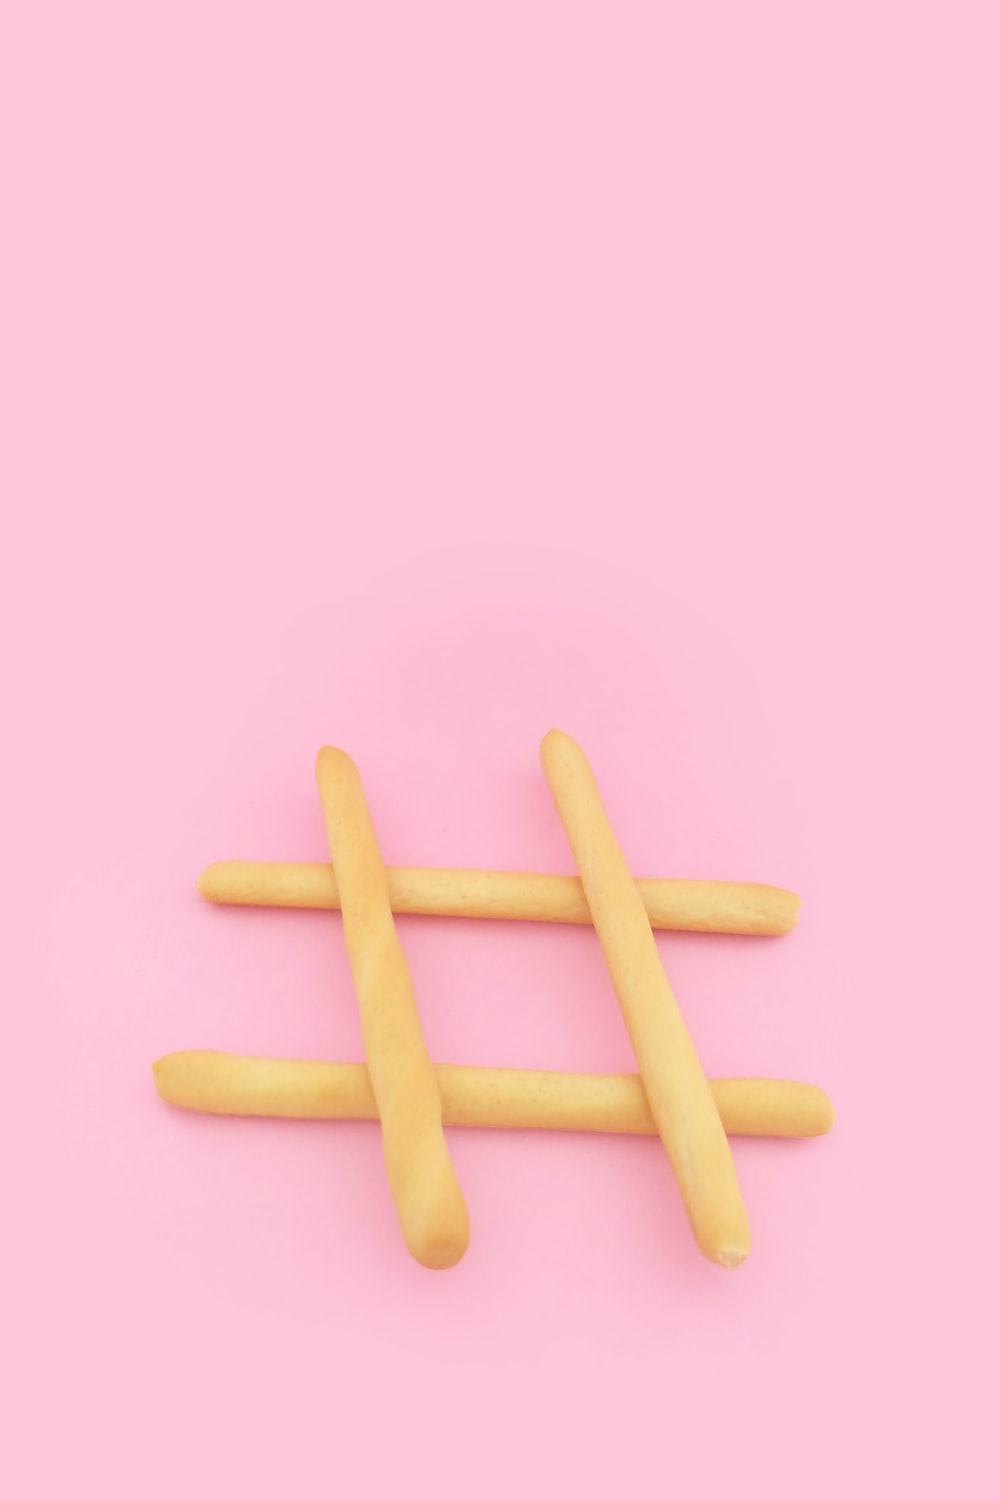 four brown wooden sticks on pink surface